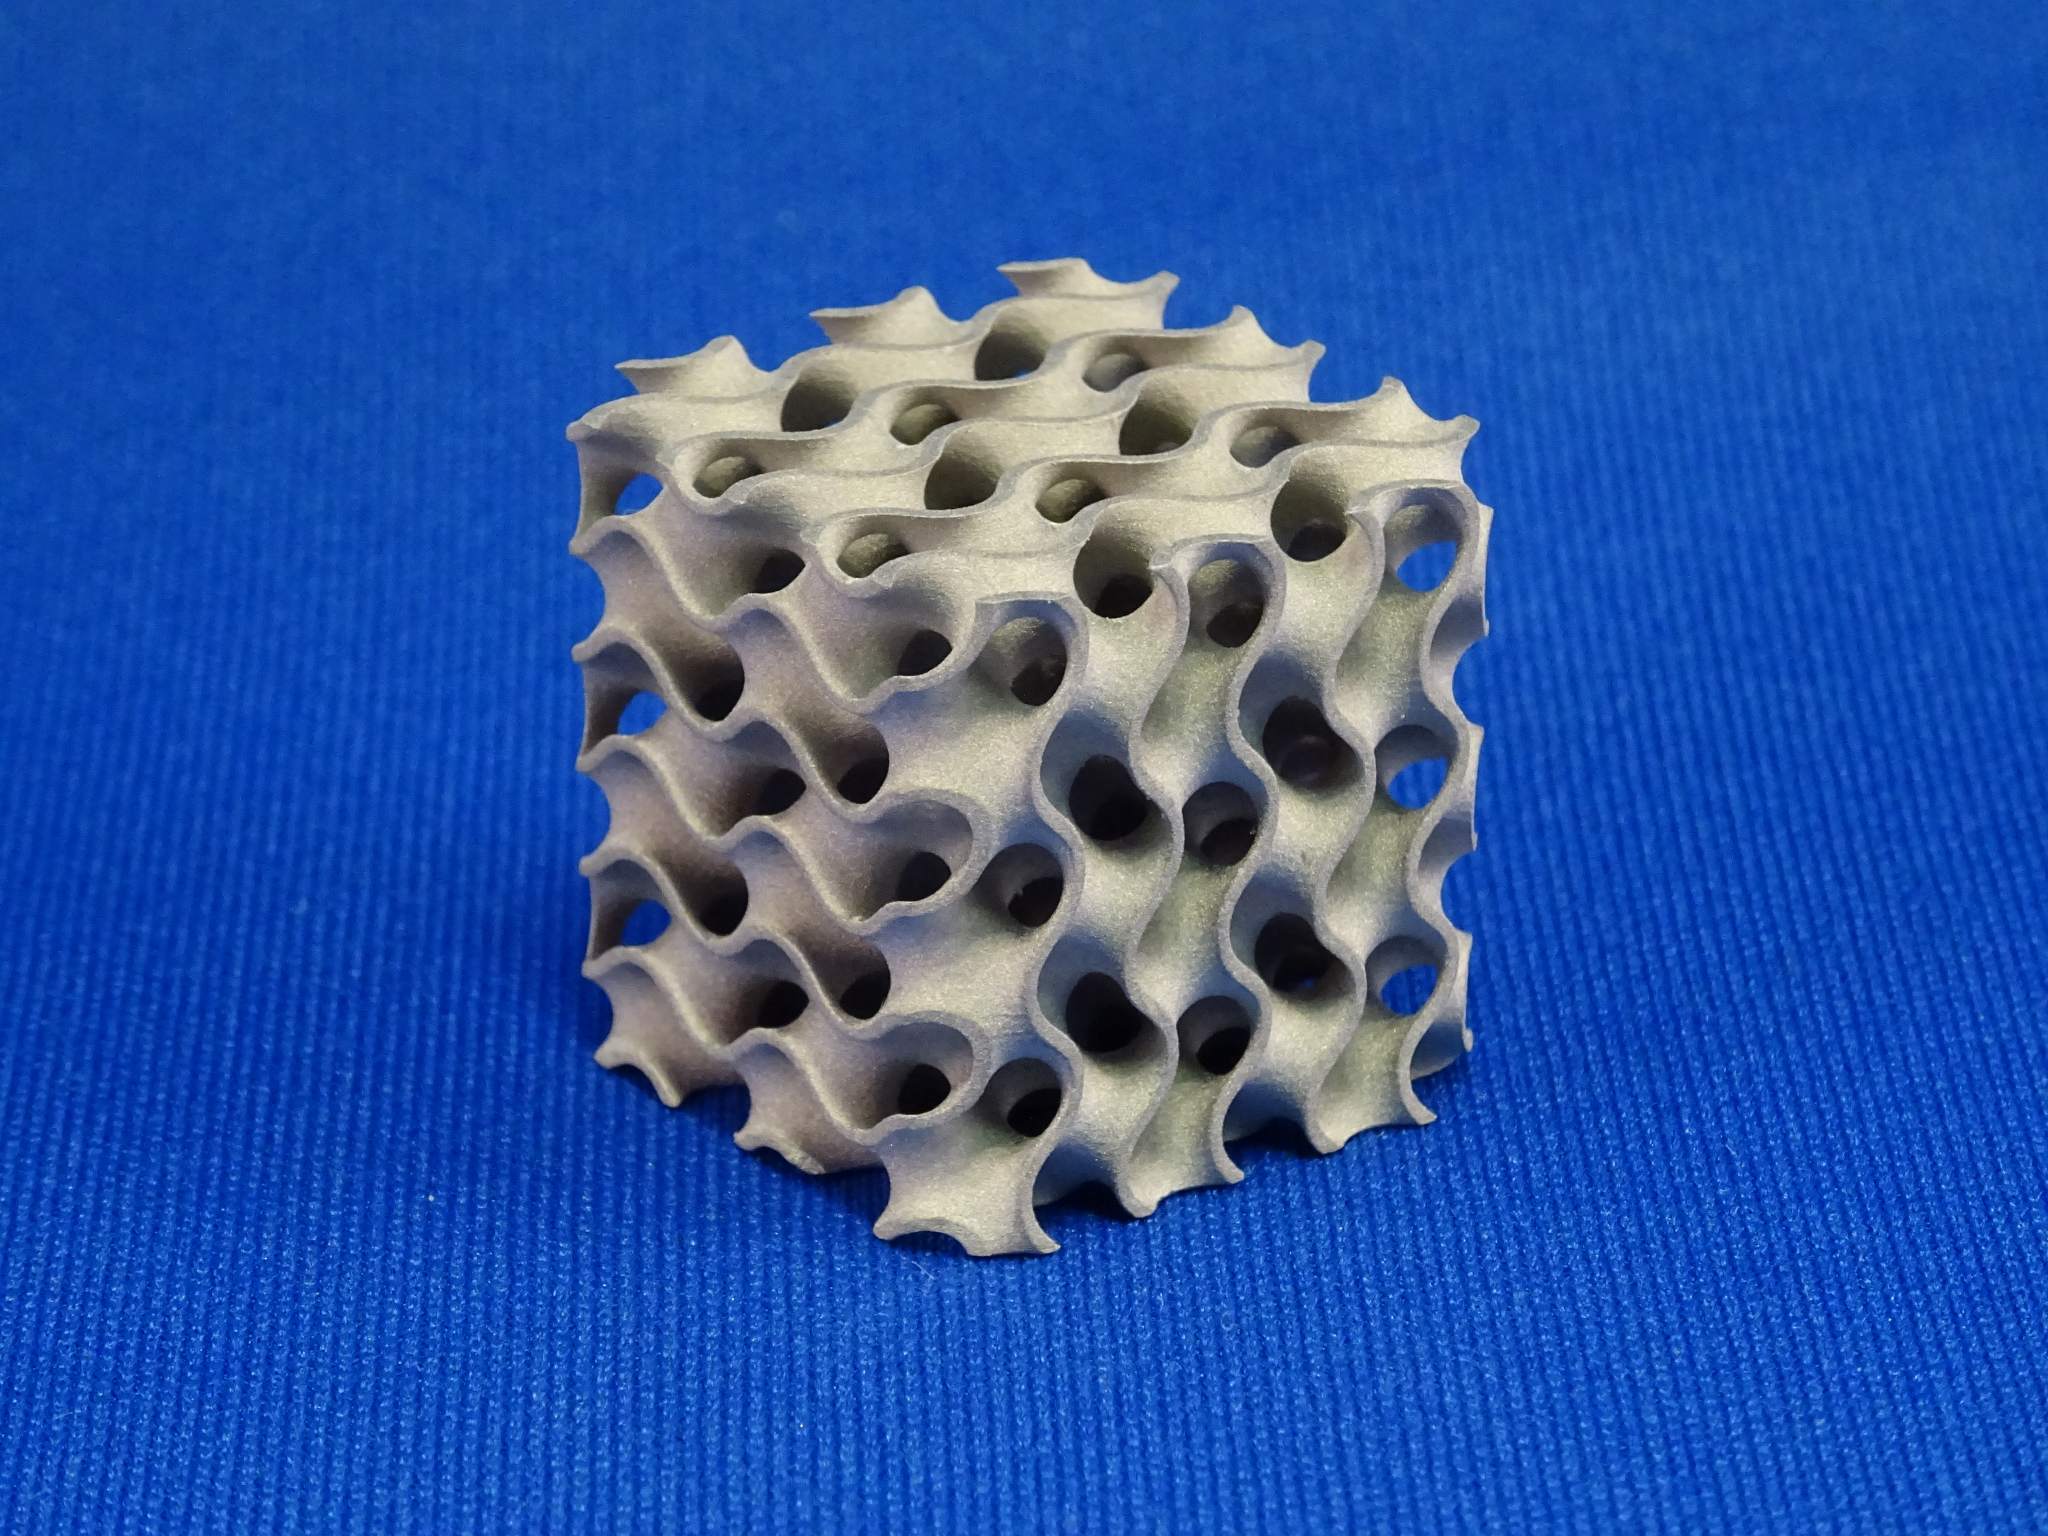 3D printed stainless steel from the ADMETALFLEX. Photo via Admatec.